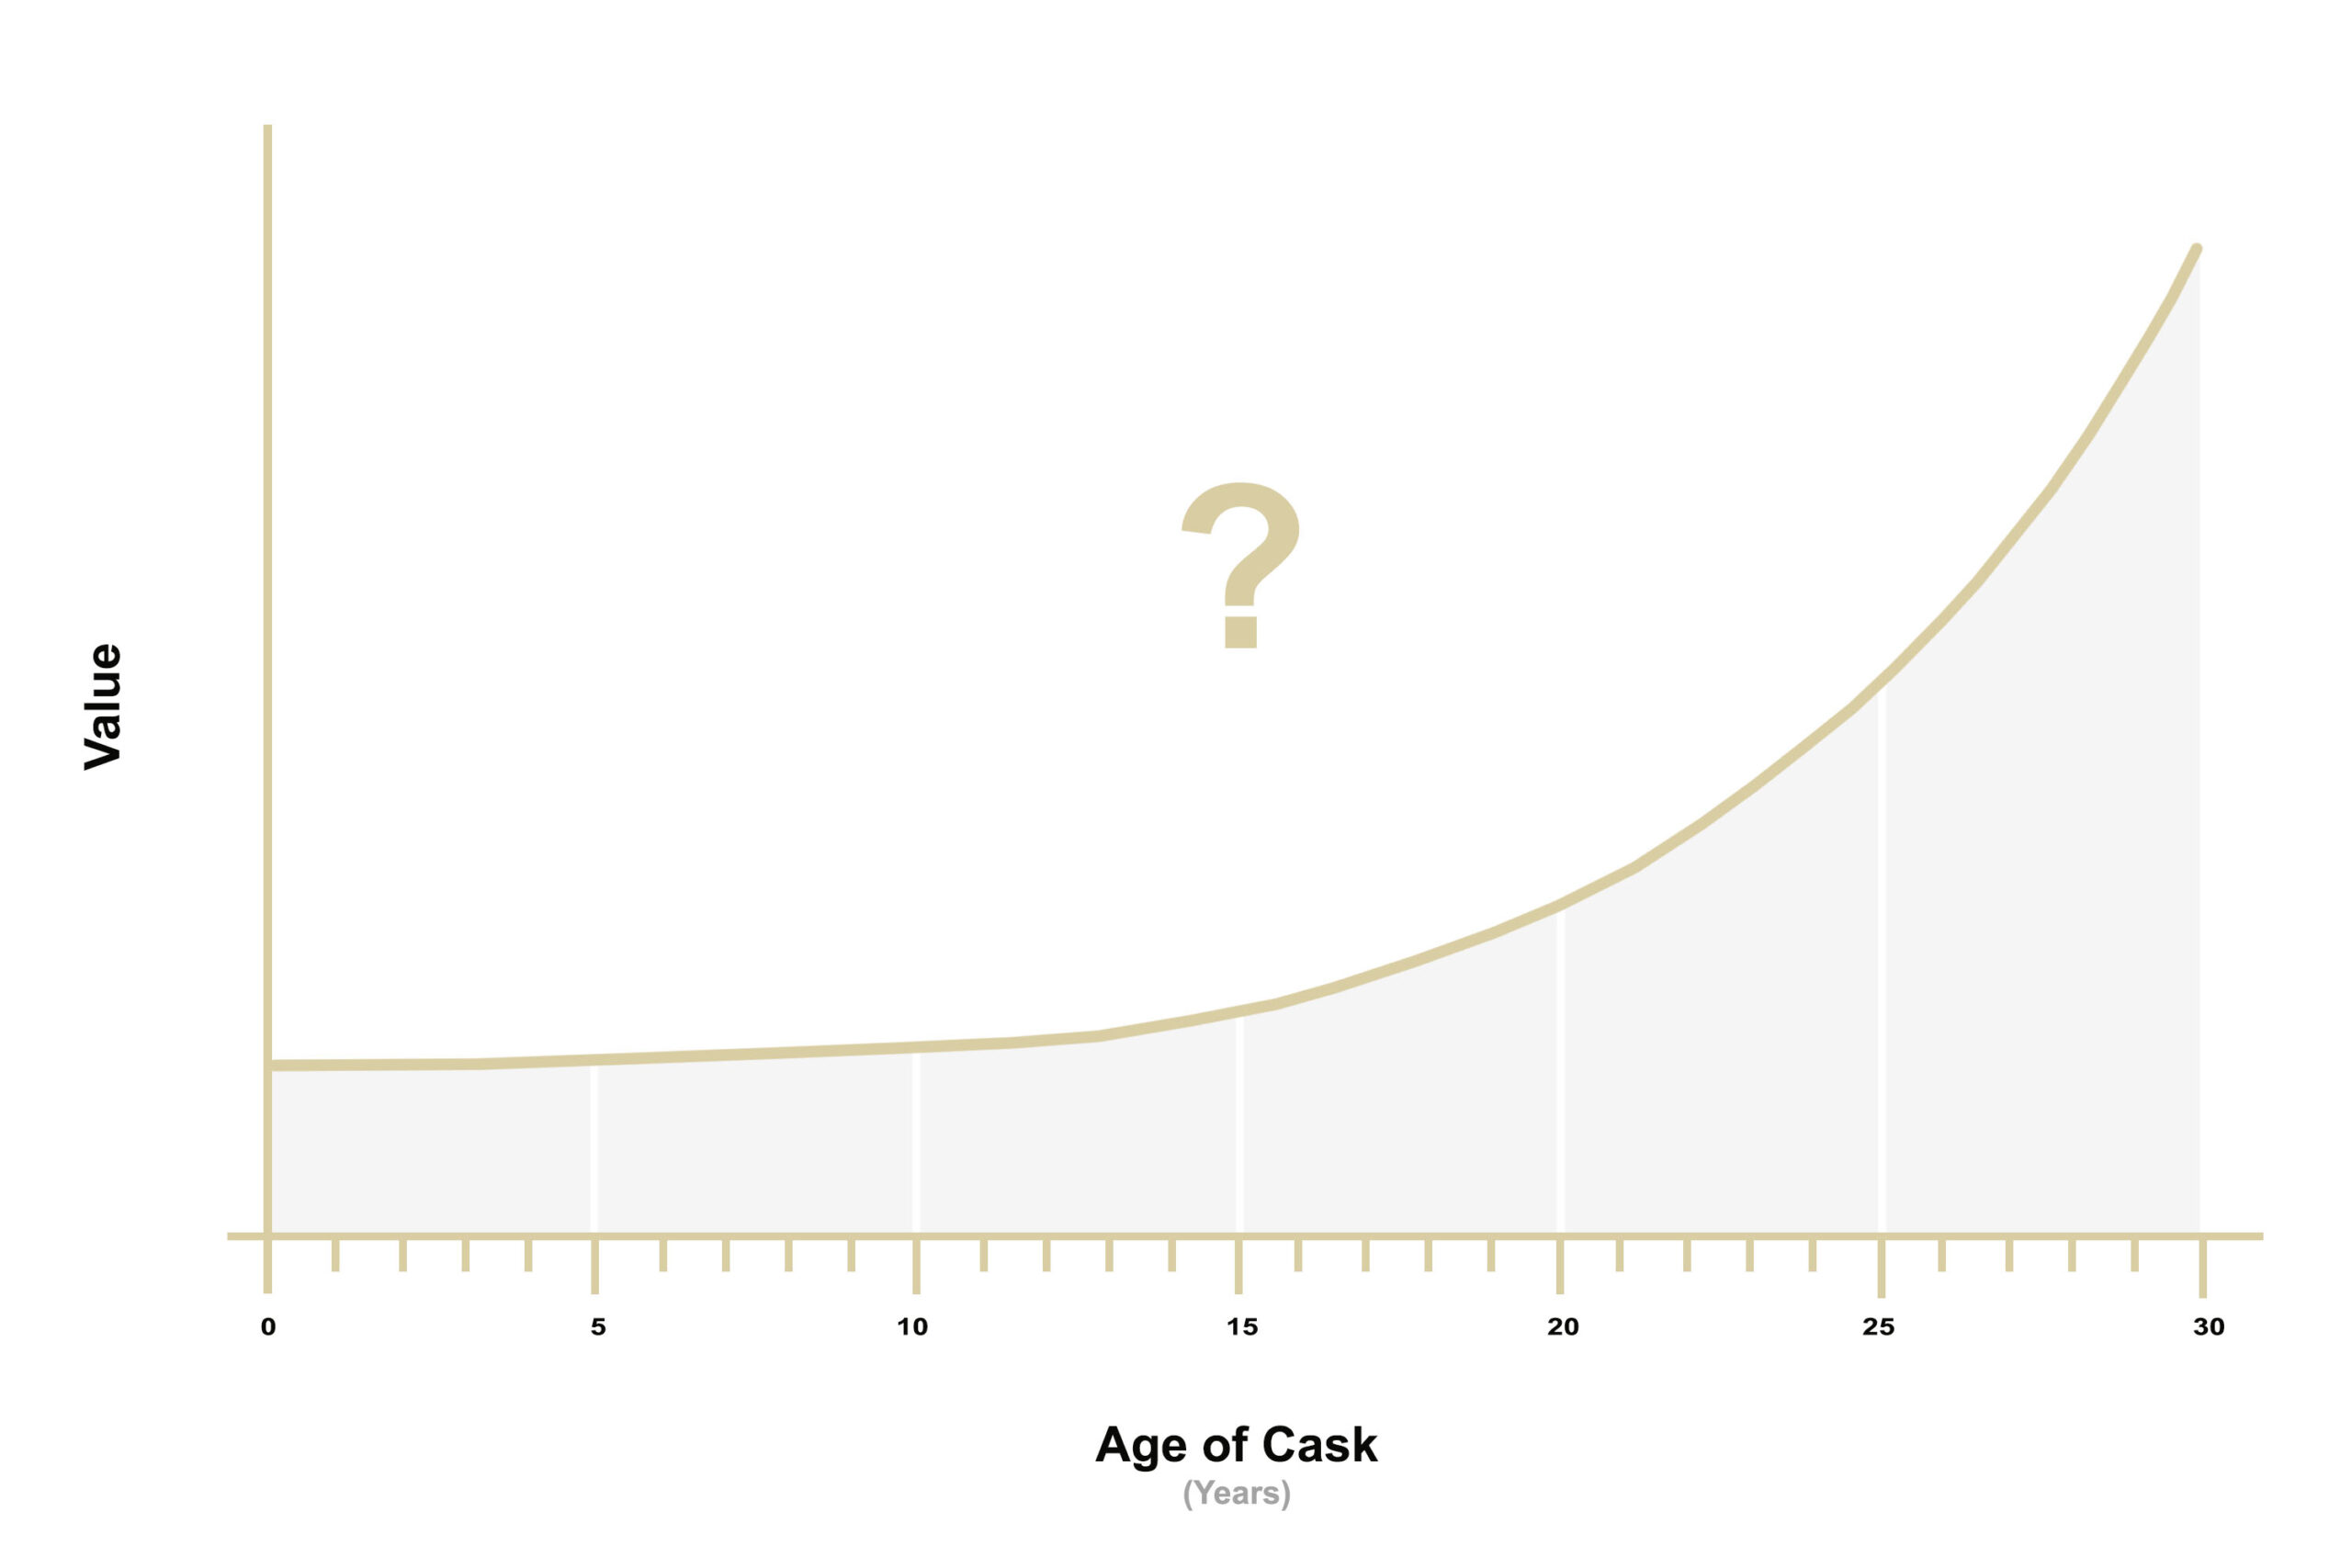 If you are looking at whisky investment, how do you decide whether to buy casks or bottles?